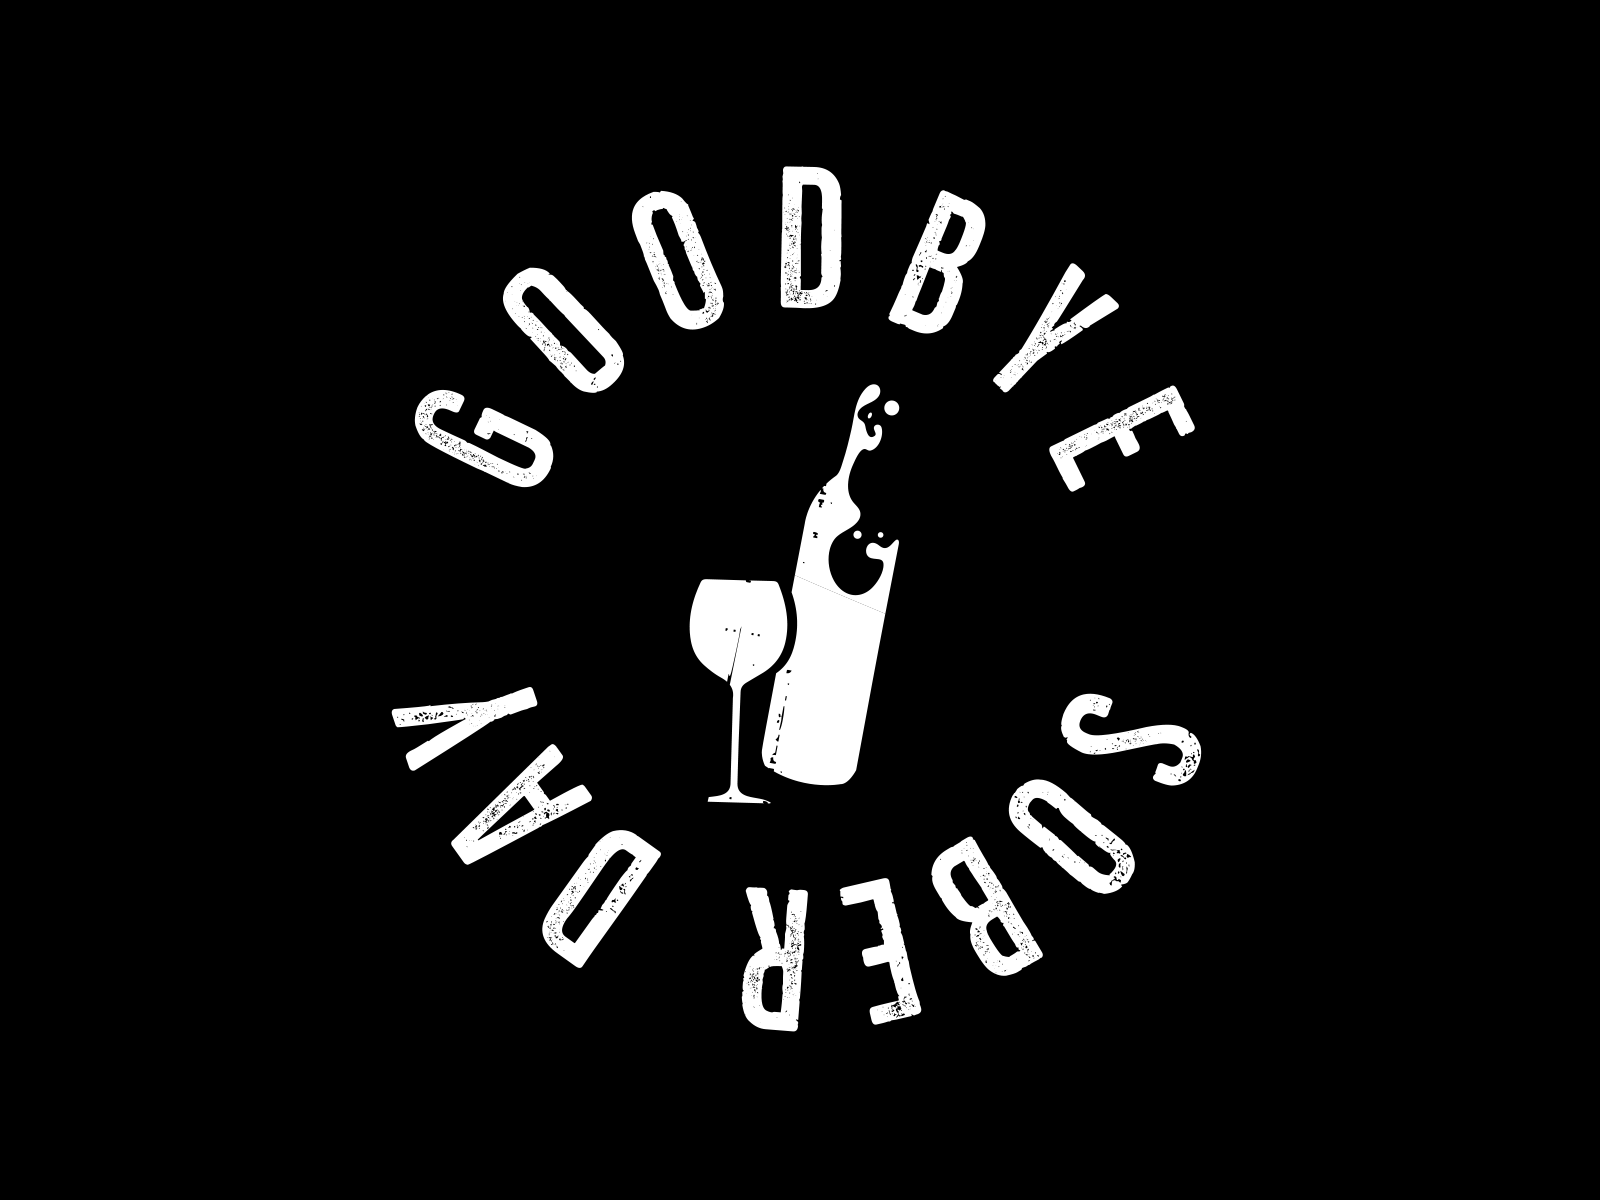 Goodbye Sober Day by Maqui Saravia on Dribbble